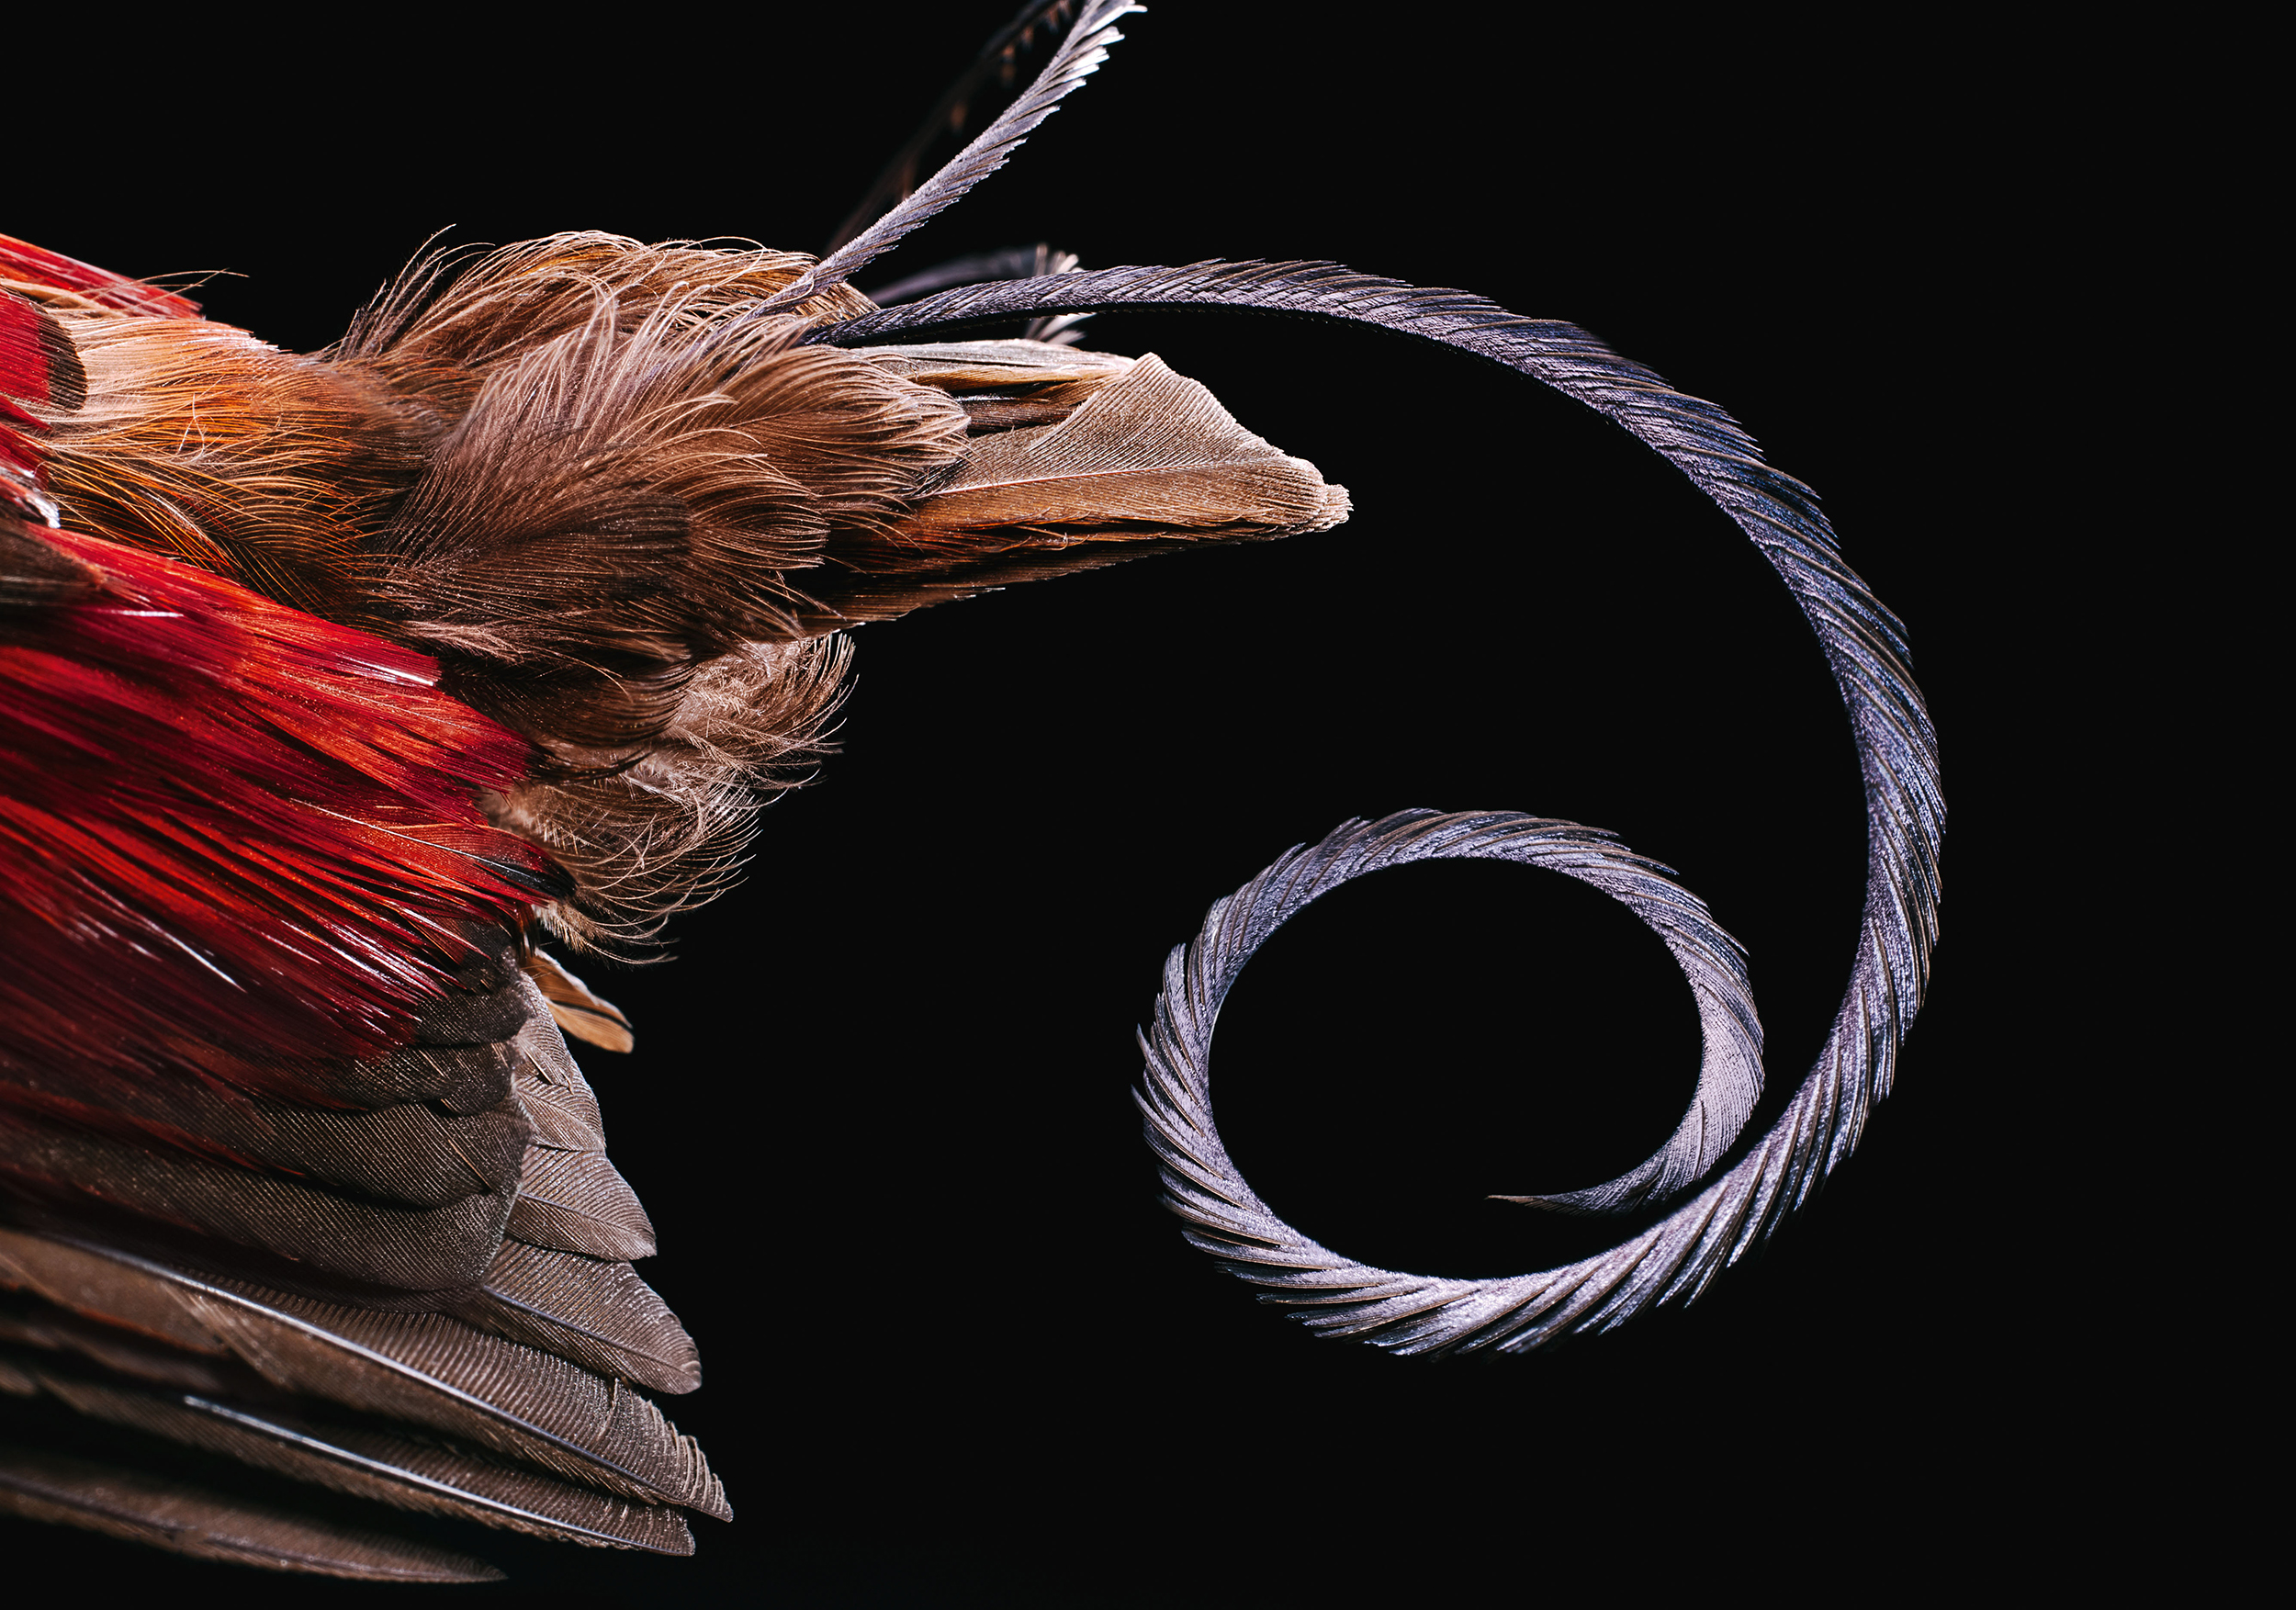 Wilson’s Bird-of-Paradise, also known as Cicinnurus respublica from western Papua New Guinea.  This image shows it's single tightly folded tail feather. The most curious feature of this species is the elaborate display the male birds employ to attract a mate. During mating season, the male birds first make a clearing on the forest floor, removing all twigs and detritus. Once a female suitor arrives, the male performs a dazzling dance.